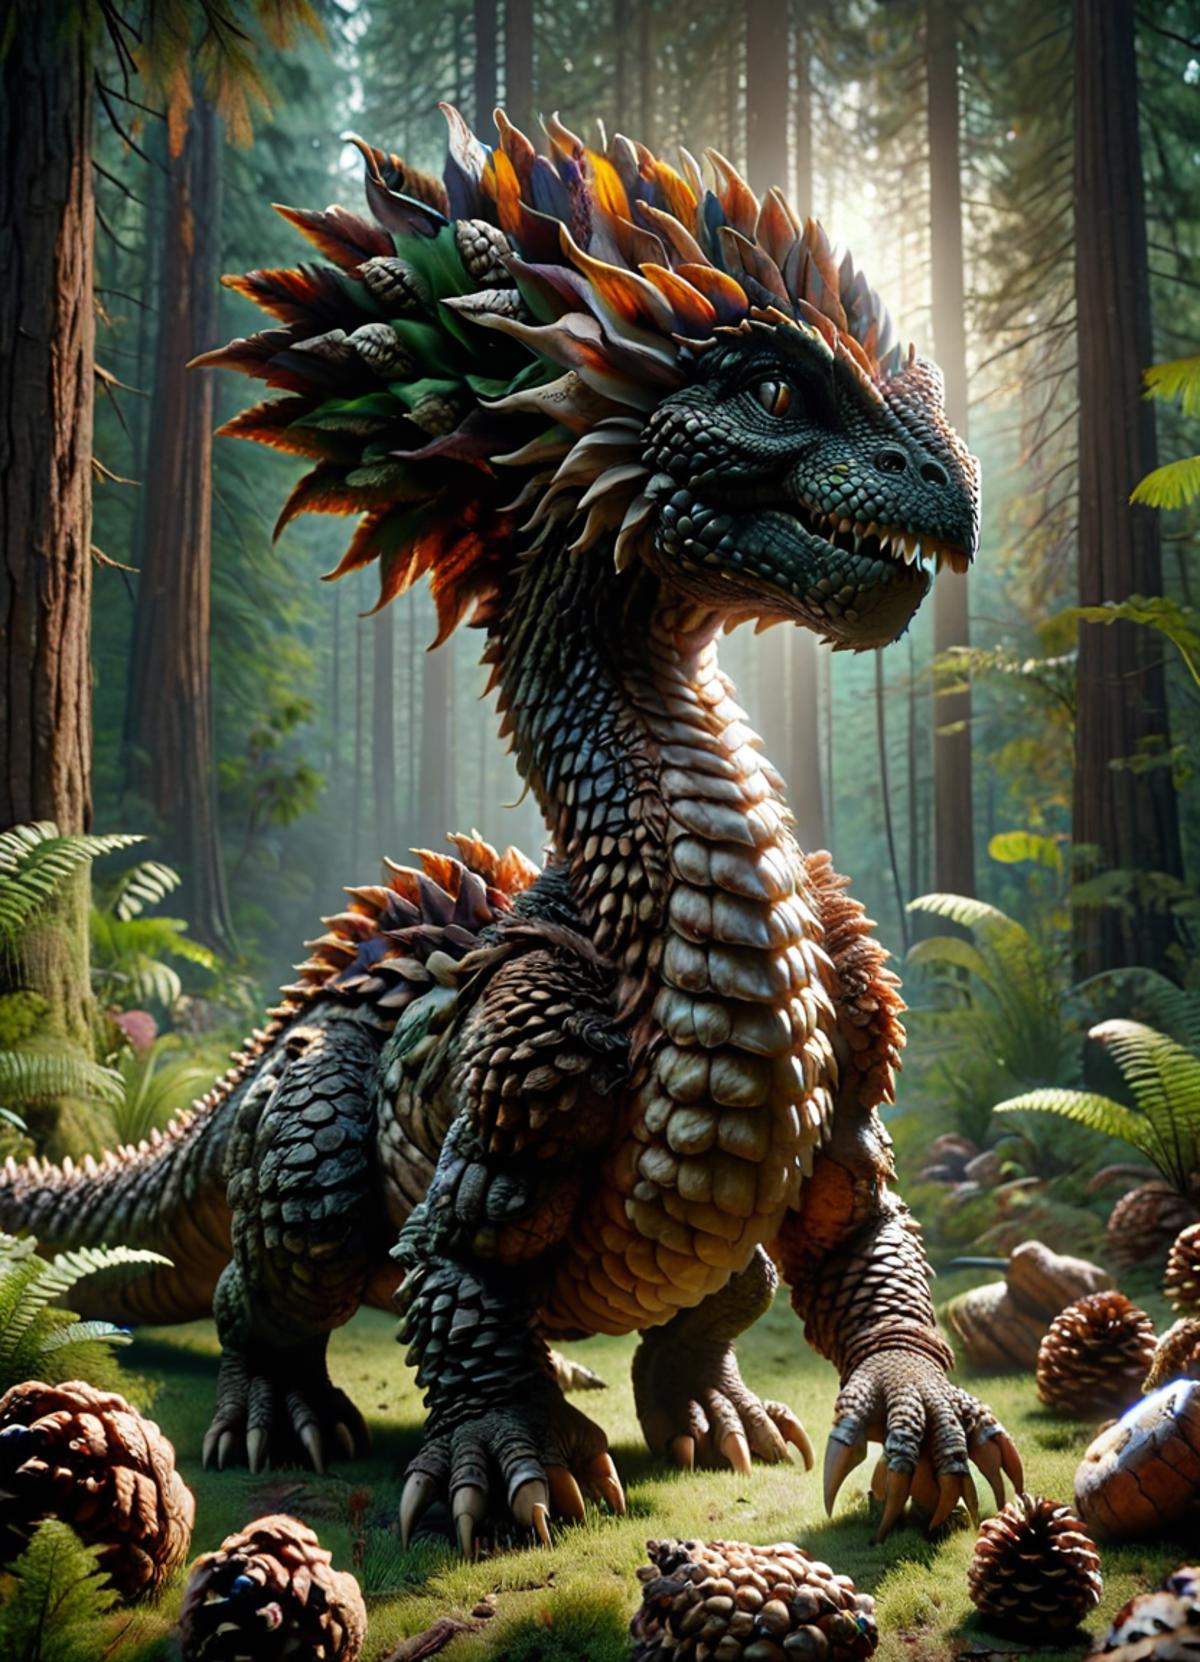 A 3D rendering of a dragon standing in a forest with a green background and a sun shining through the trees.